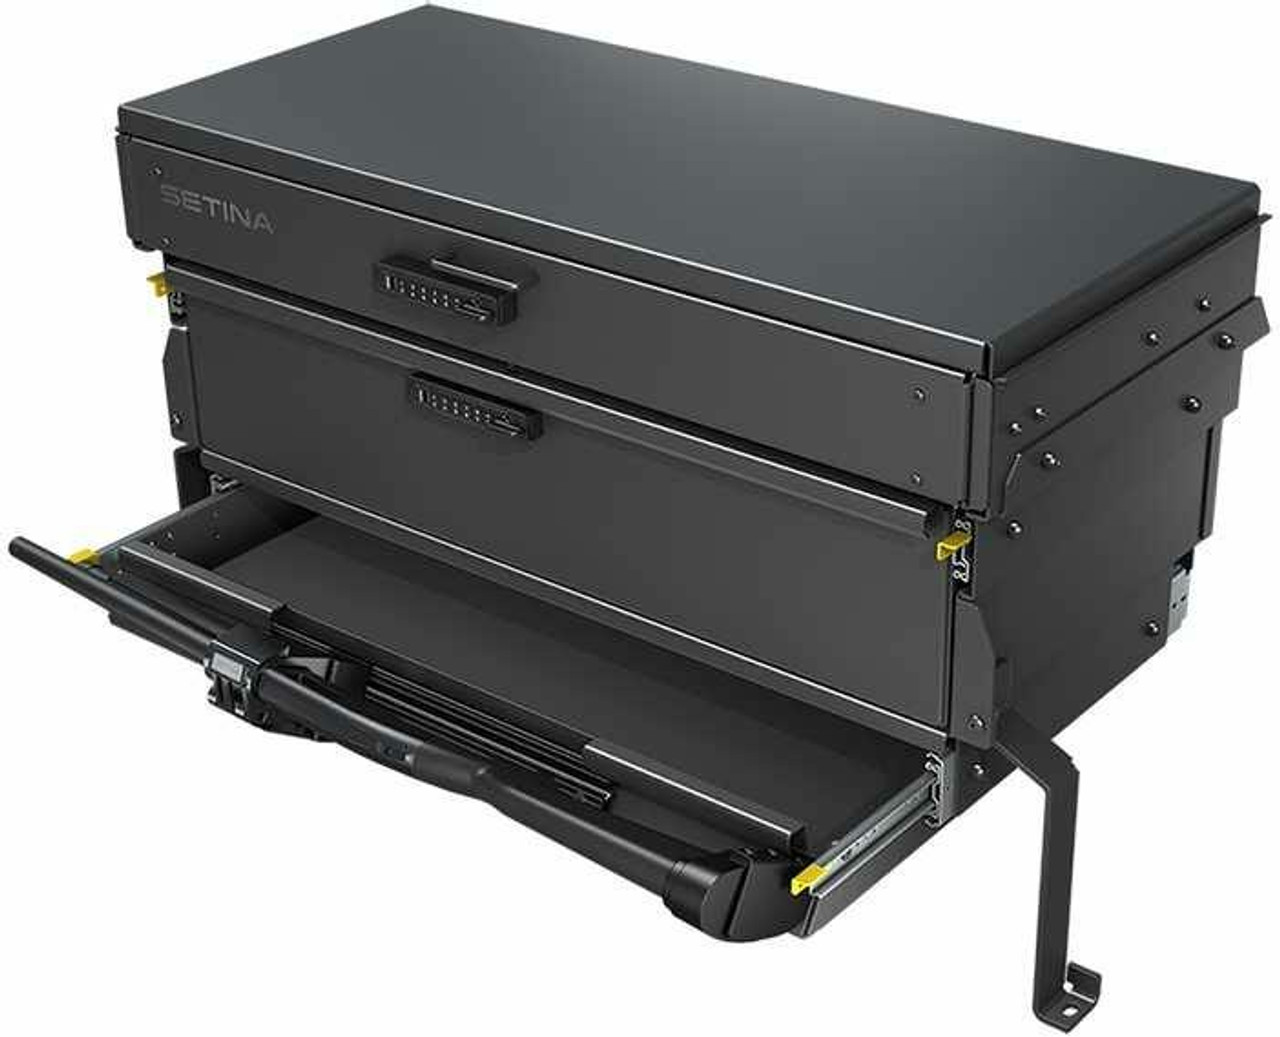 CarGo 300 Car Desk - Mobile Office - Request a Quote